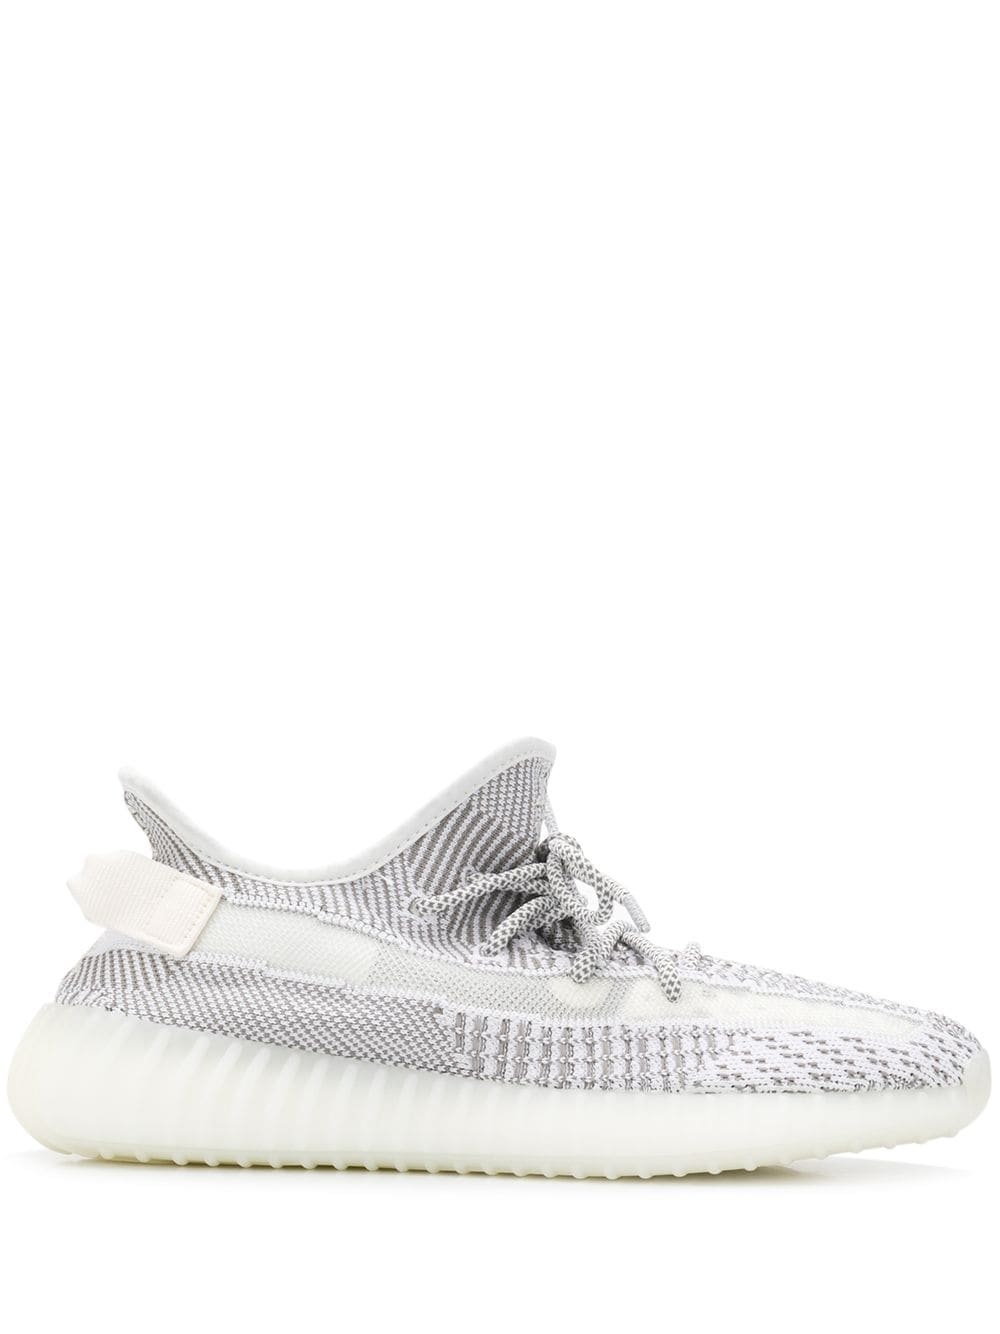 Yeezy Boost 350 V2 "Static" sneakers - 1